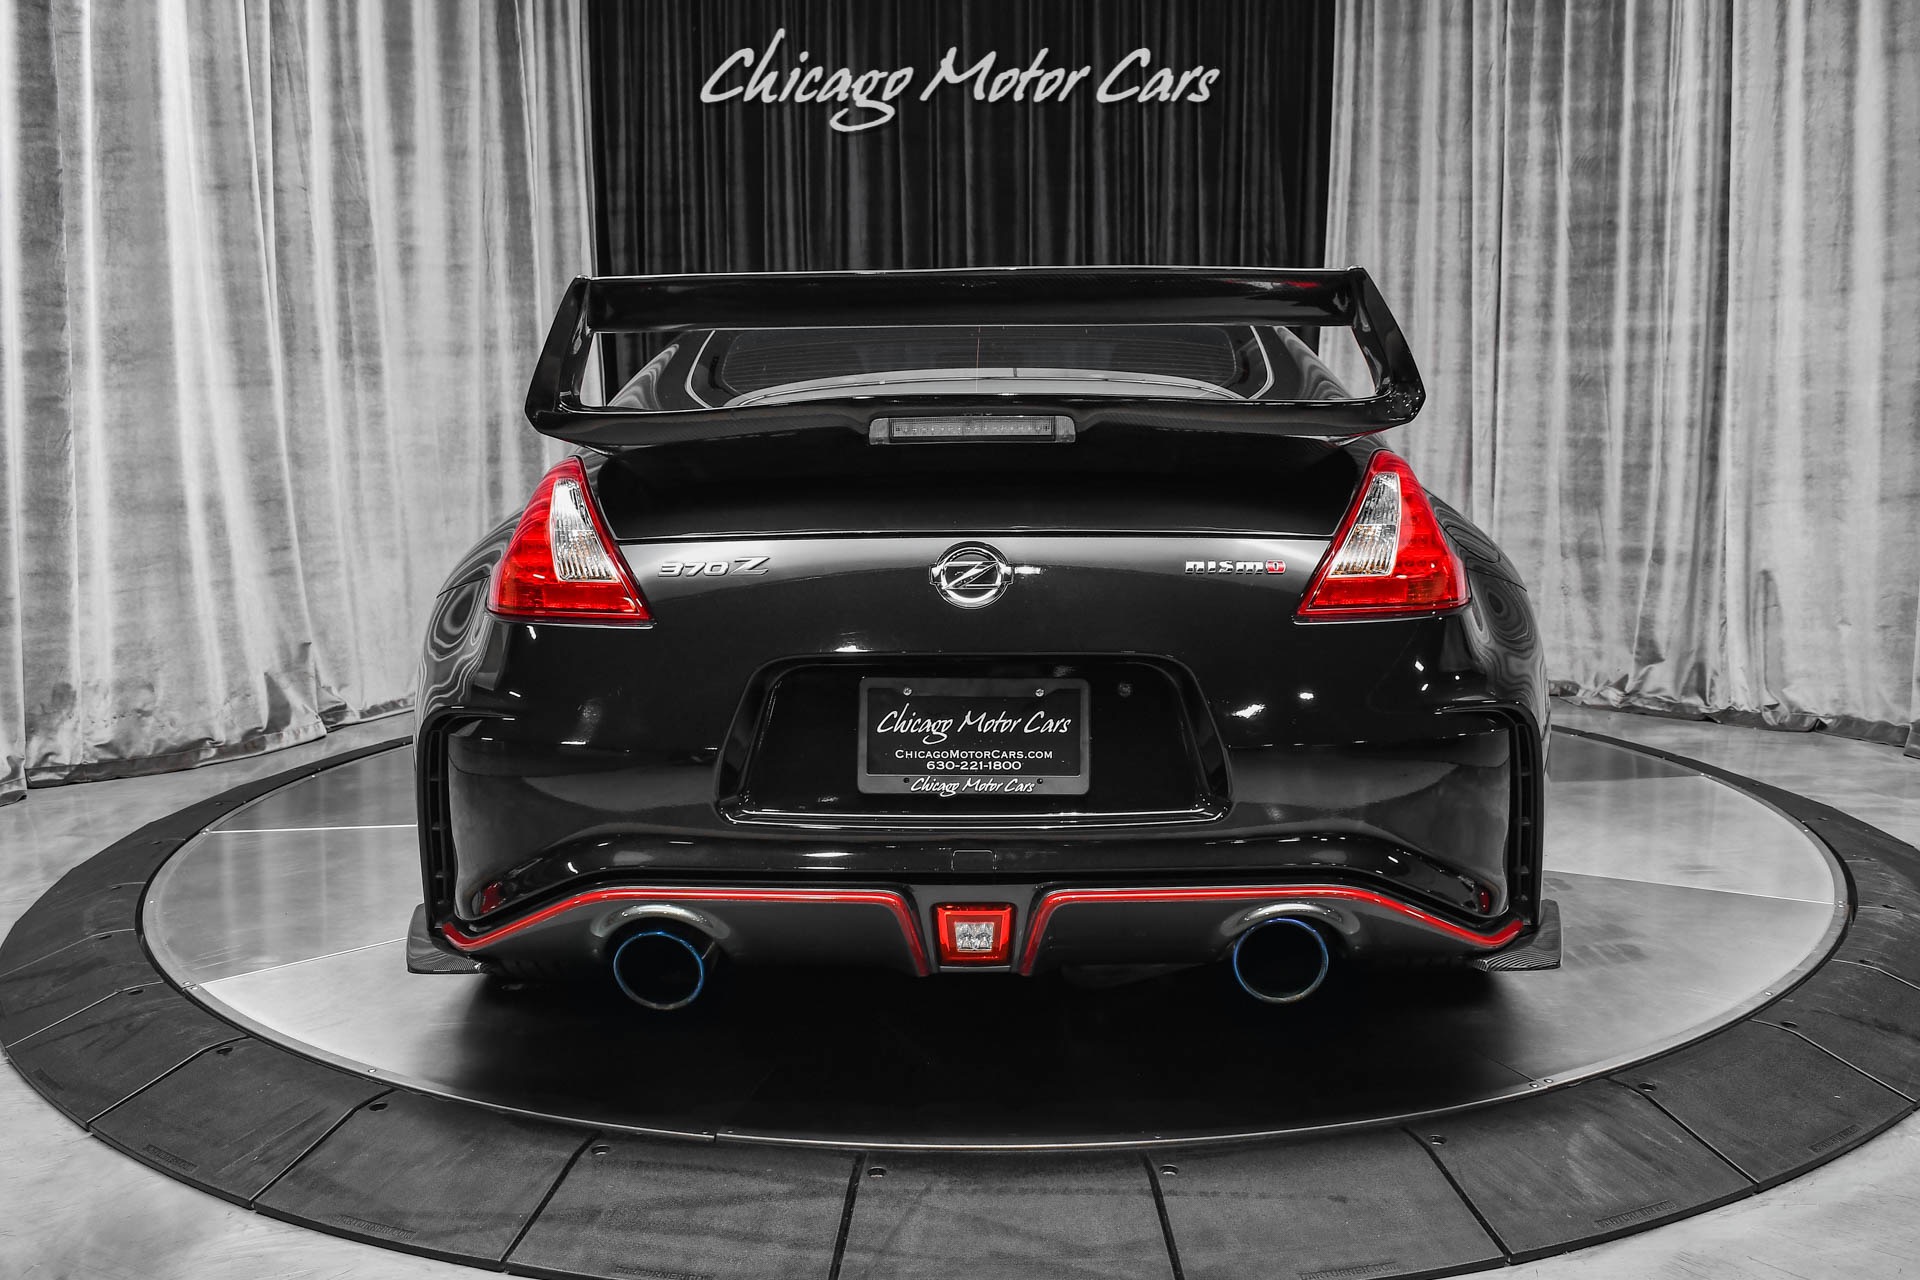 Used-2016-Nissan-370Z-NISMO-Coupe-Magnetic-Black-Tons-of-Carbon-Fiber-Remote-Start-UPGRADES